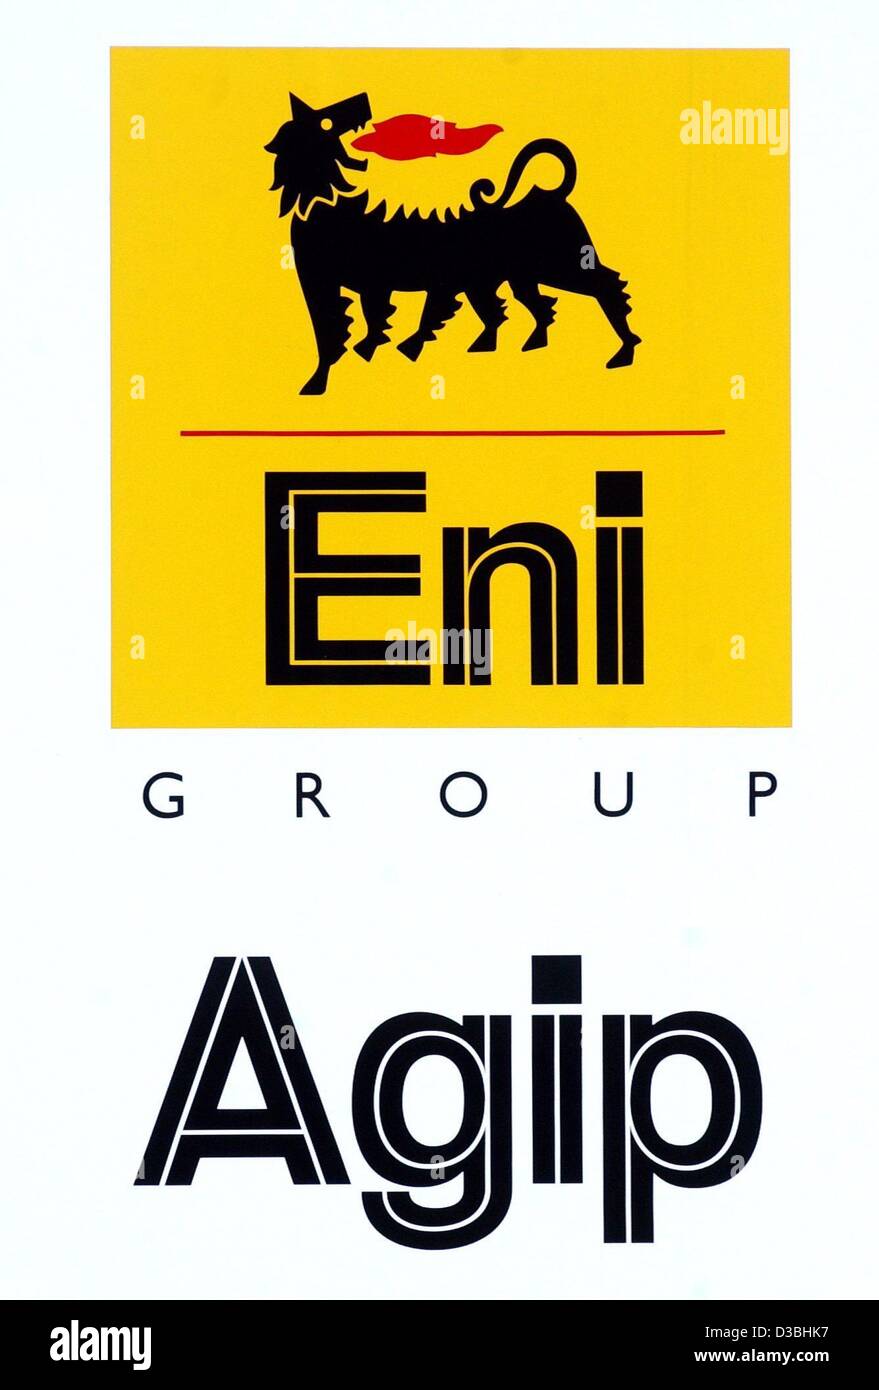 (dpa) - The logo of Eni Group Agi, an operator of gas filling stations, pictured in Schwedt Oder, Germany, 5 May 2003. Stock Photo